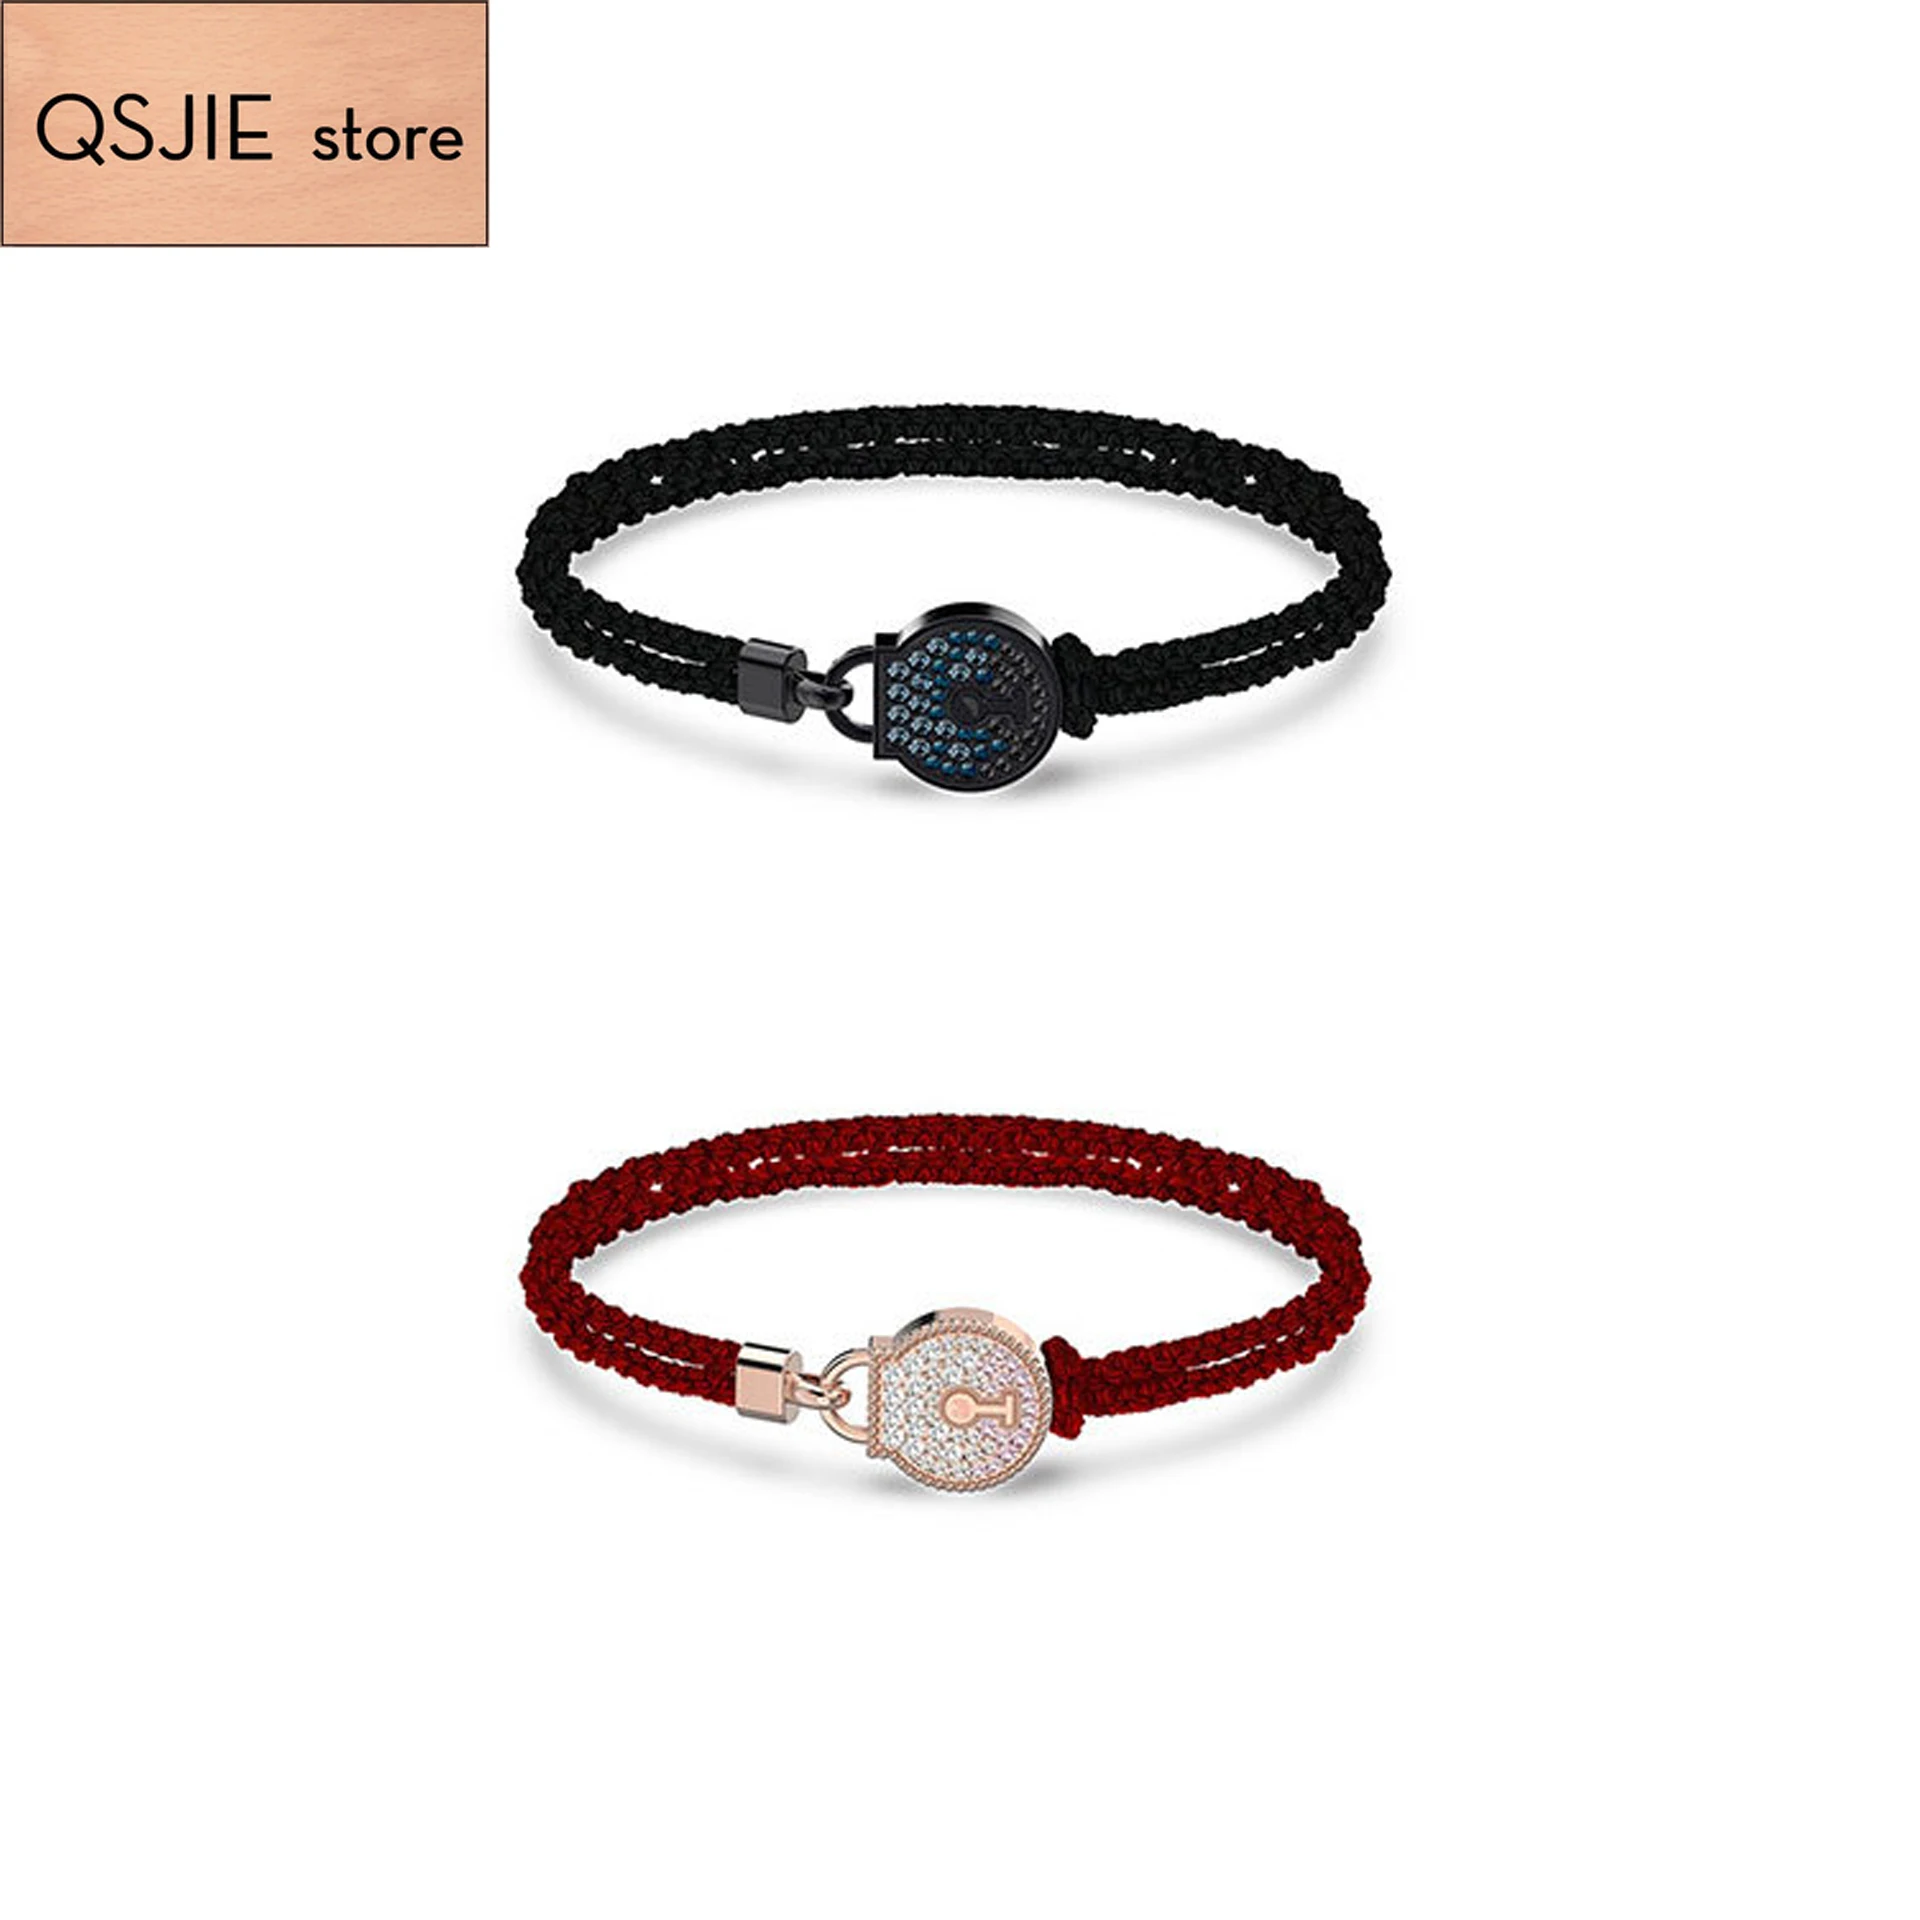 

QSJIE High quality SWA new style. Simple lock good mood every day, woven rope bracelet Glamorous fashion jewelry